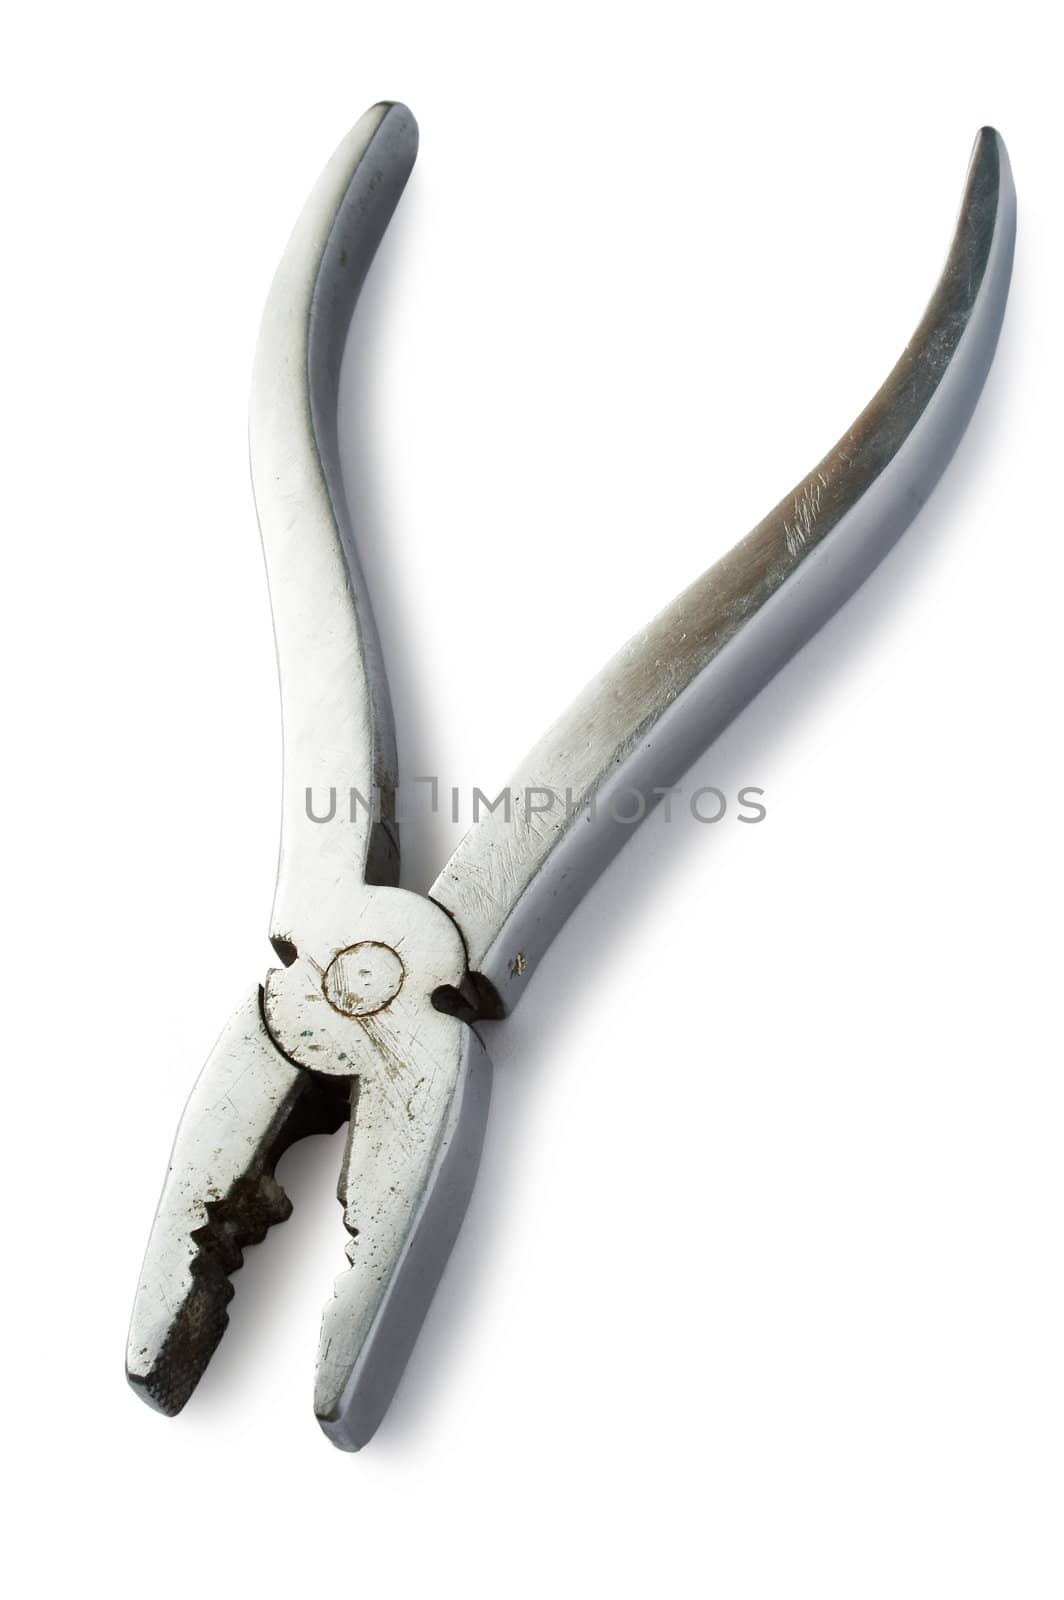 Steel and old pliers on a white background